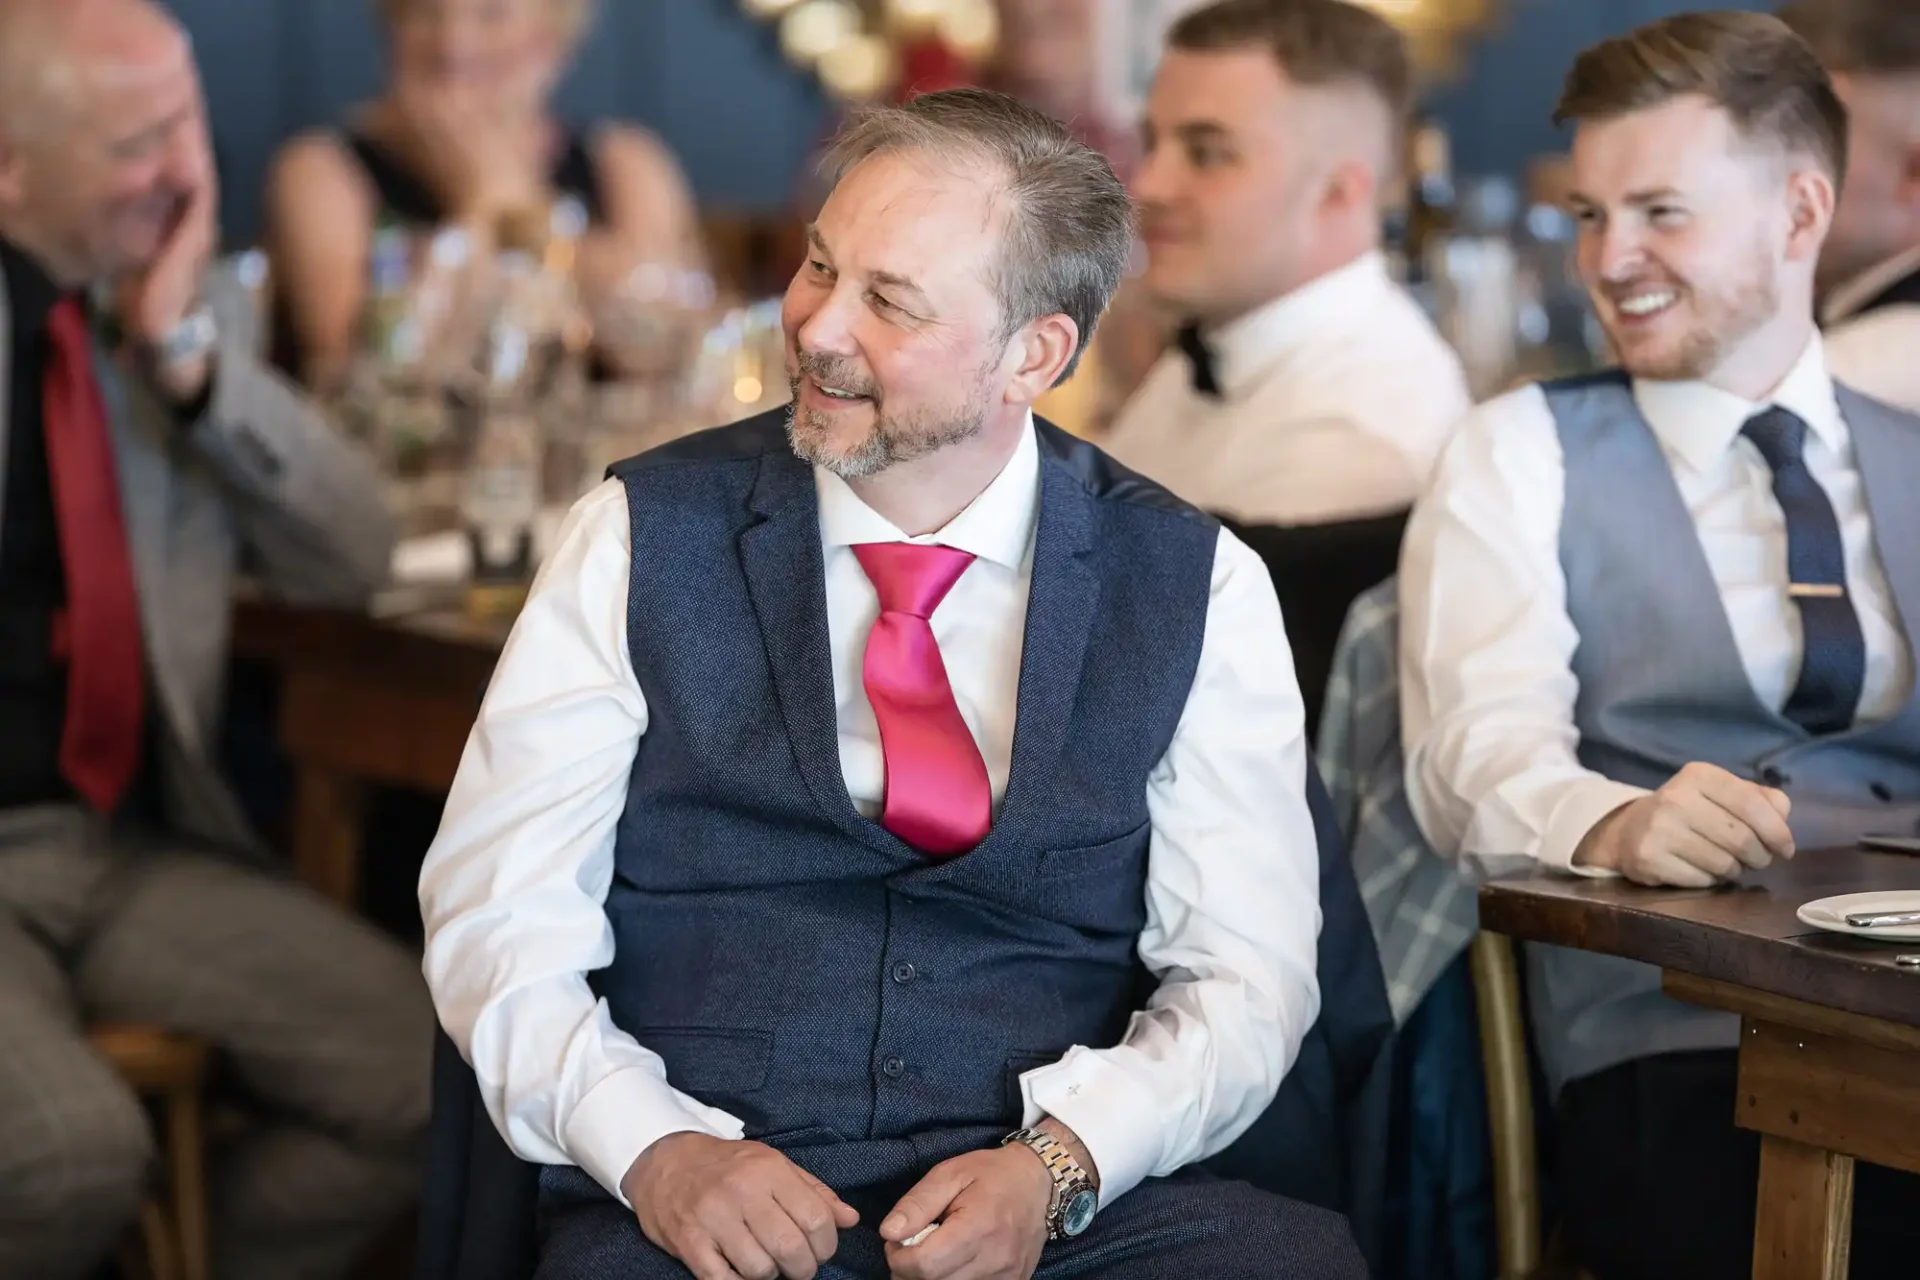 A man in a vest and red tie smiles while sitting at a festive event, surrounded by other guests also in semi-formal attire.